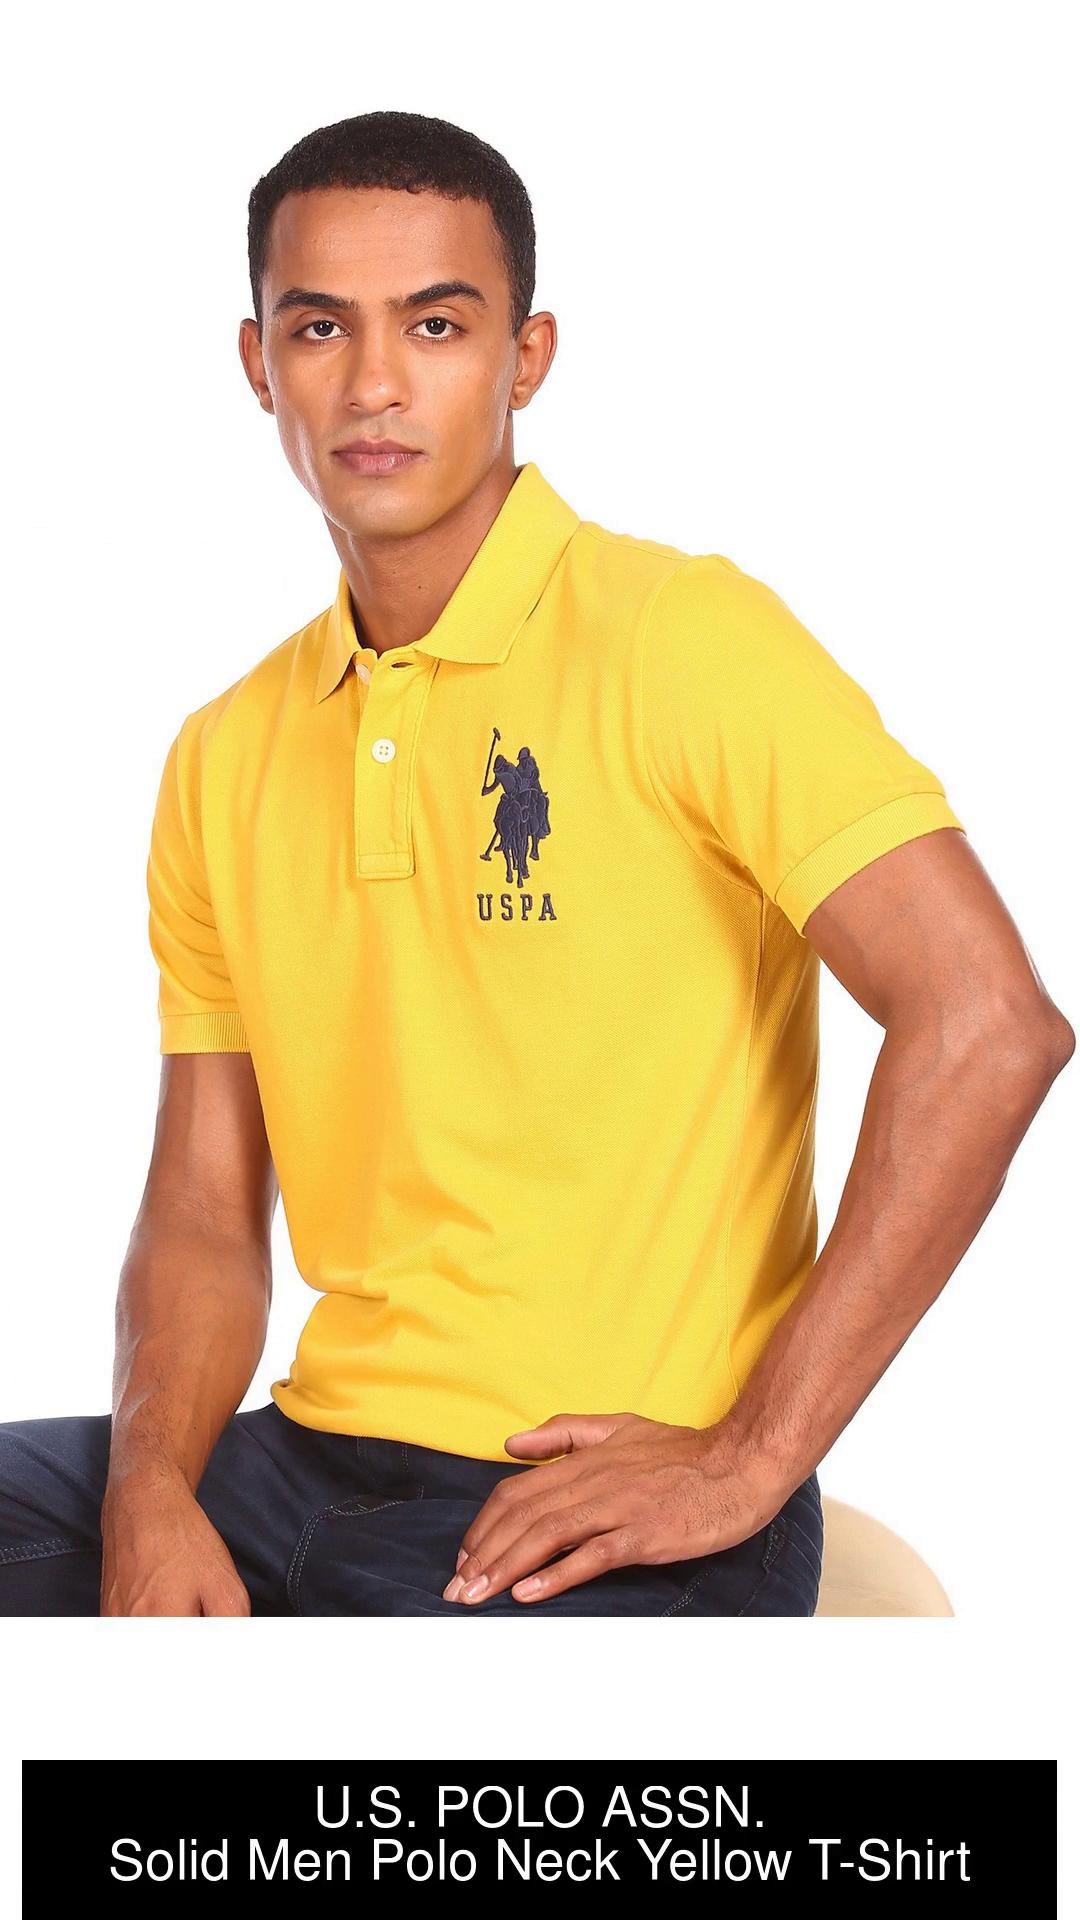 U.S. POLO ASSN. Solid Men Polo Neck Yellow T-Shirt - Buy U.S. POLO ASSN. Solid  Men Polo Neck Yellow T-Shirt Online at Best Prices in India